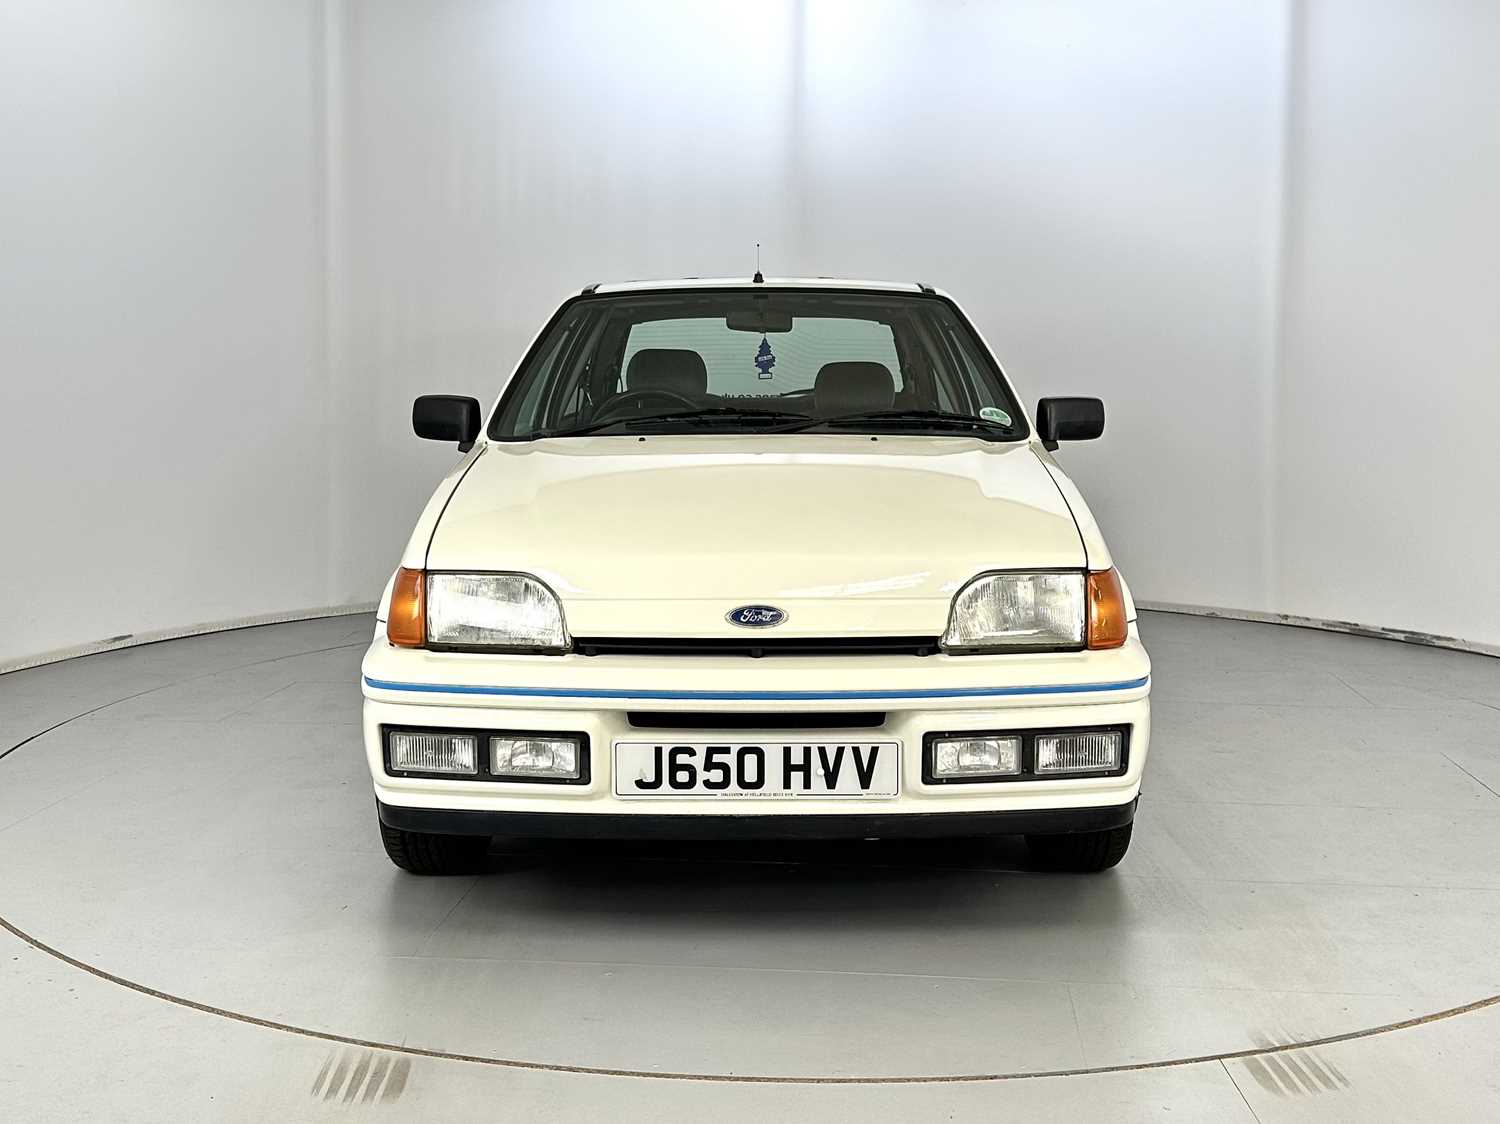 1991 Ford Fiesta XR2i - Image 2 of 30